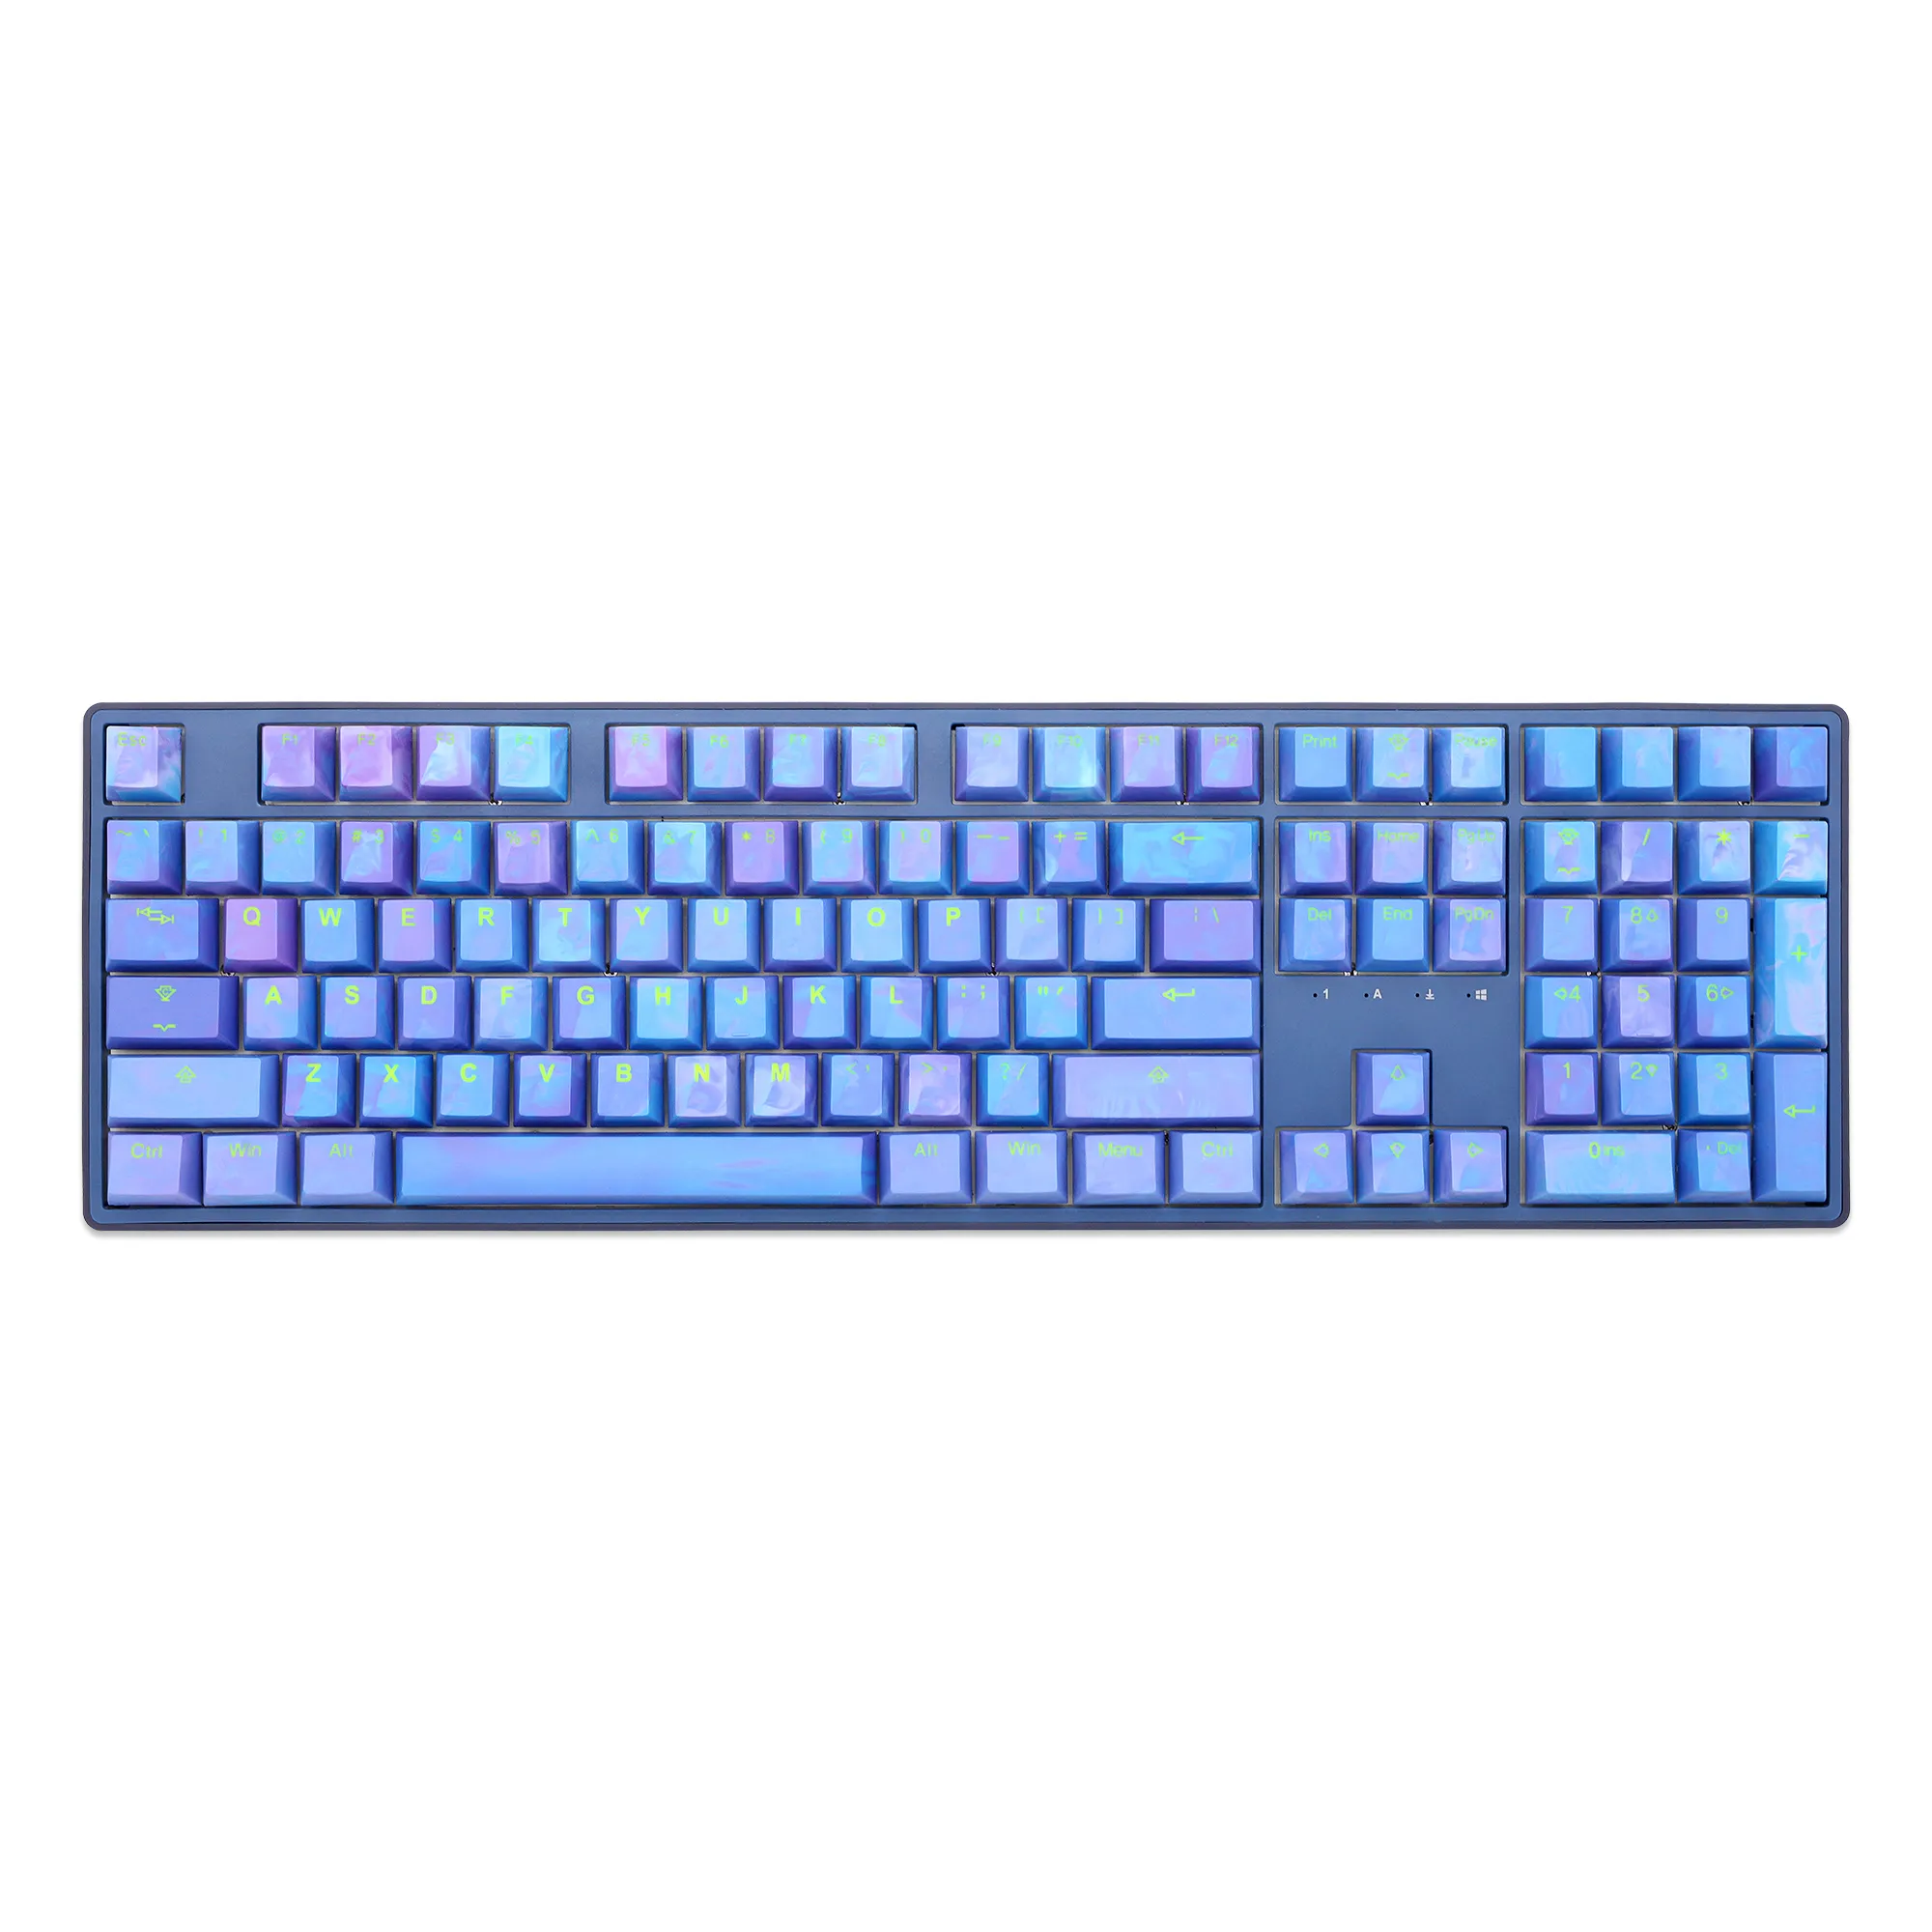 Taihao Avatar G2 Doubleshot keycaps for diy gaming mechanical keyboard Cubic OEM Profile for BM60 BM68 - Pudding Keycap